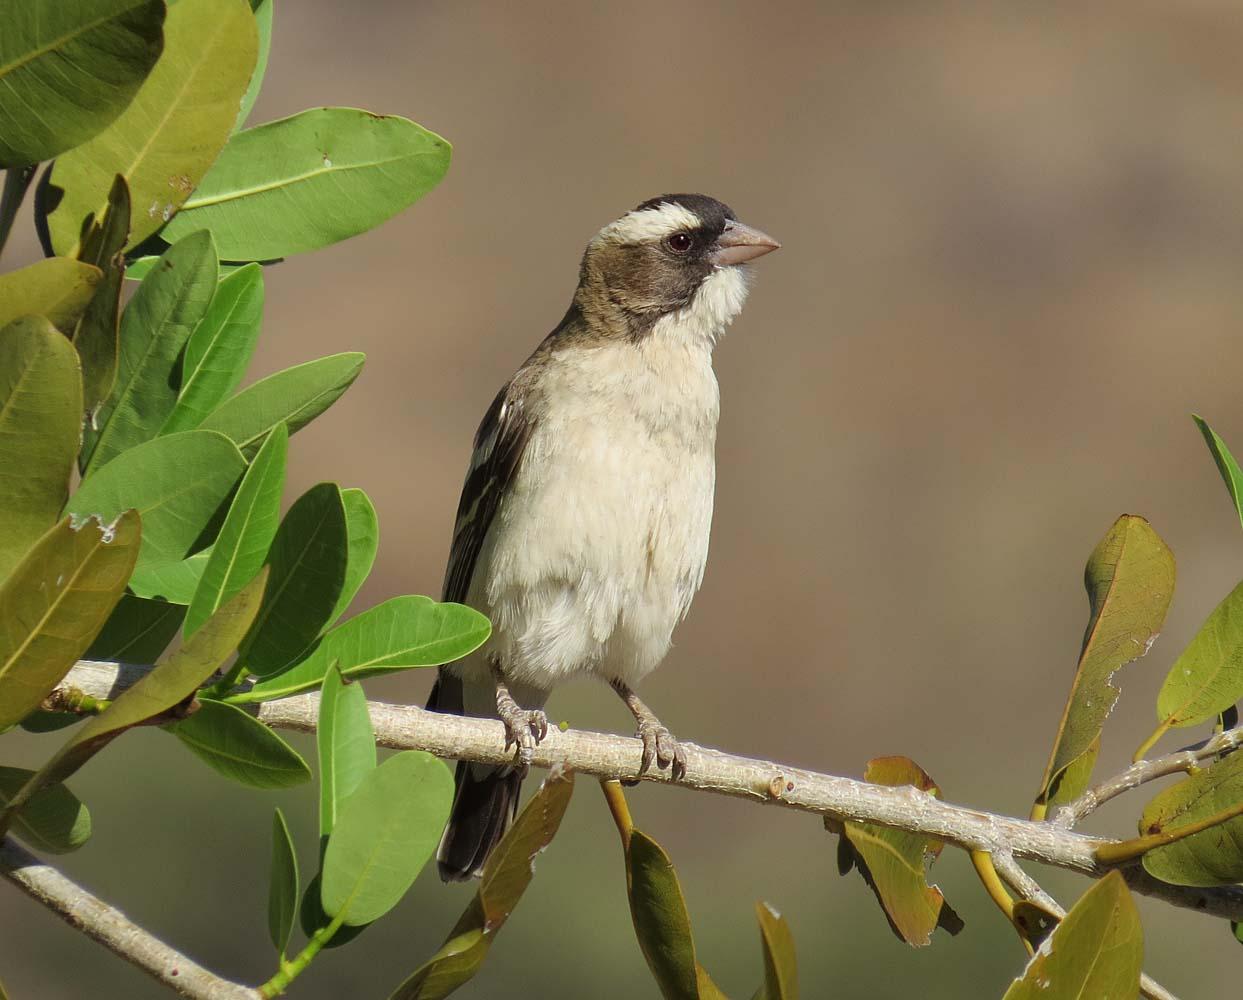 White-browed Sparrow-Weaver Photo by Peter Boesman